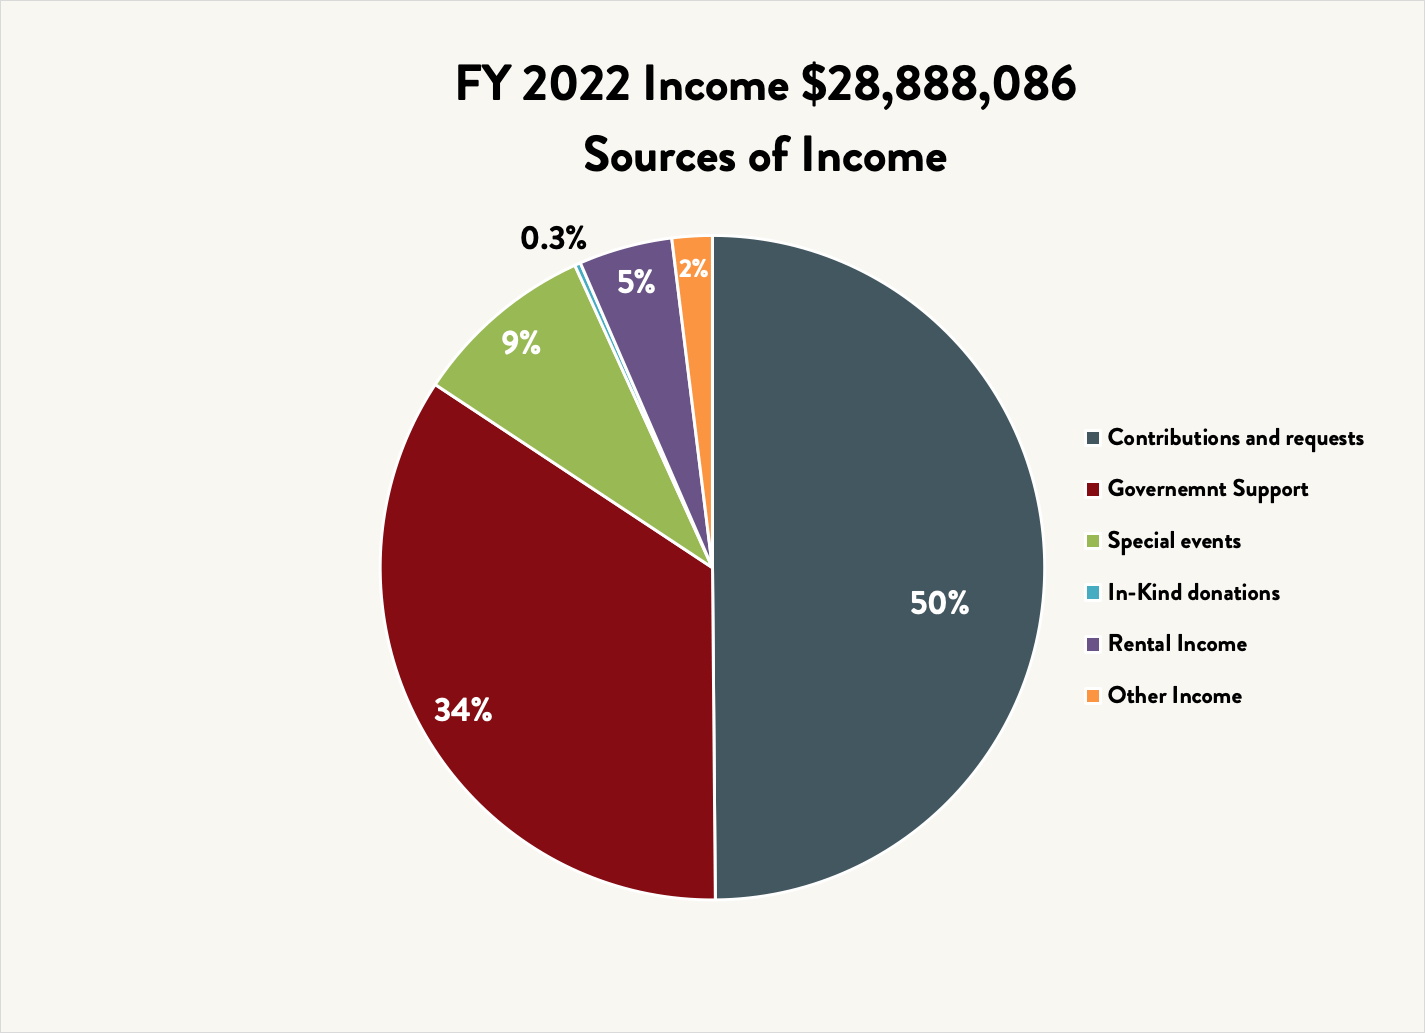 An off-white background with a pie chart that consist of navy blue, red, and green colors, with percentages inside the pie chart that reads: 50%, 34%, 9%, 0.3%, 5%, and 2%. Text that reads: “FY 2022 Income $28,888,086 Sources of Income, Contributions and requests, Government Support, Special events, In-Kind donations, Rental Income, and other Income.” 